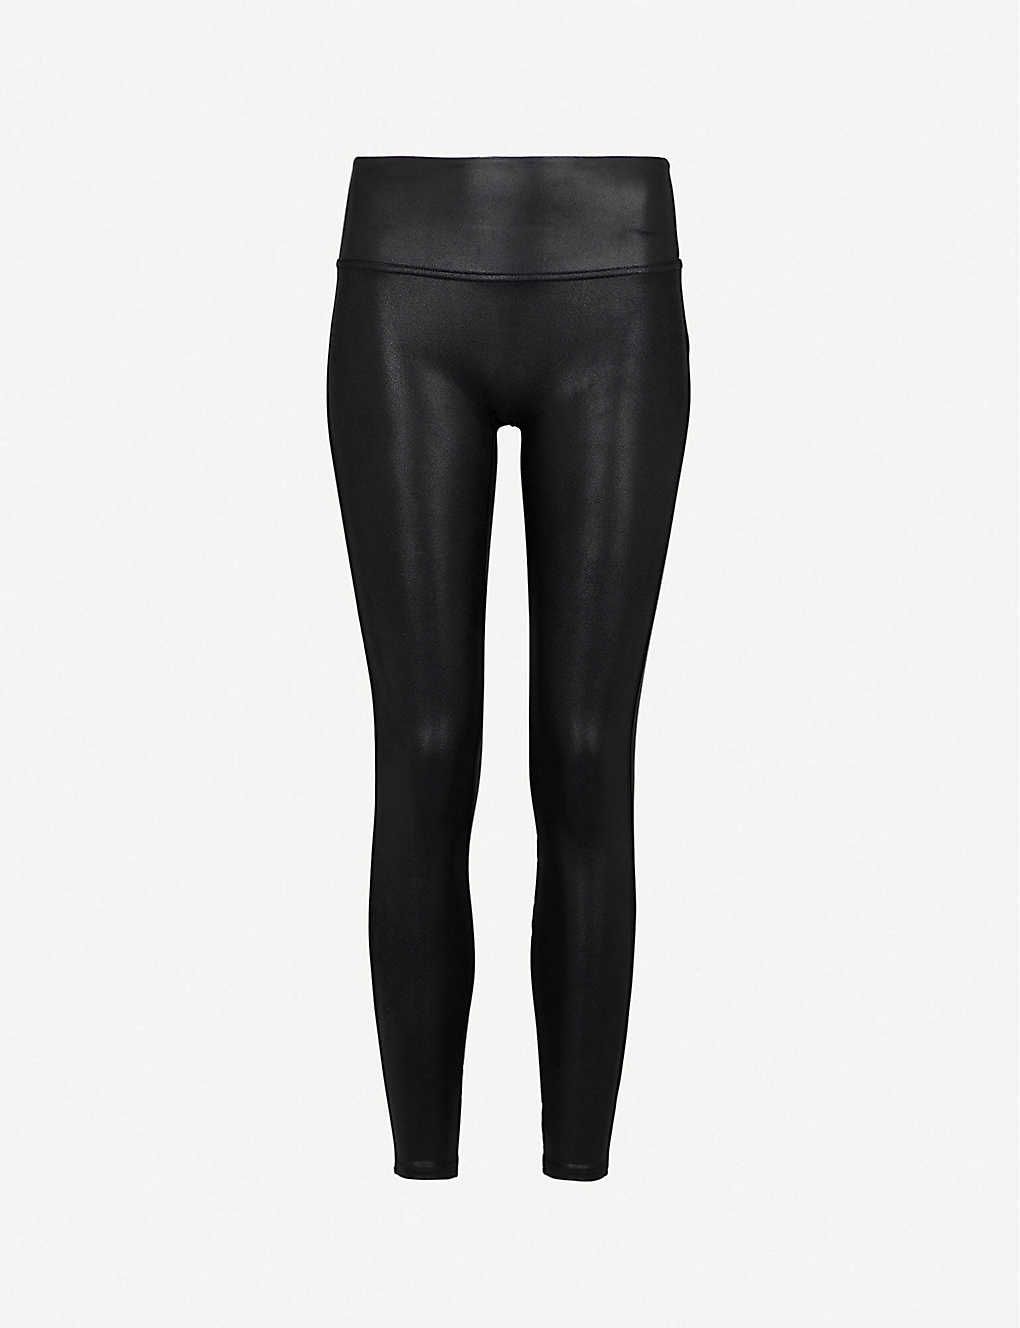 Details more than 118 spanx seamless leggings review latest - netgroup ...